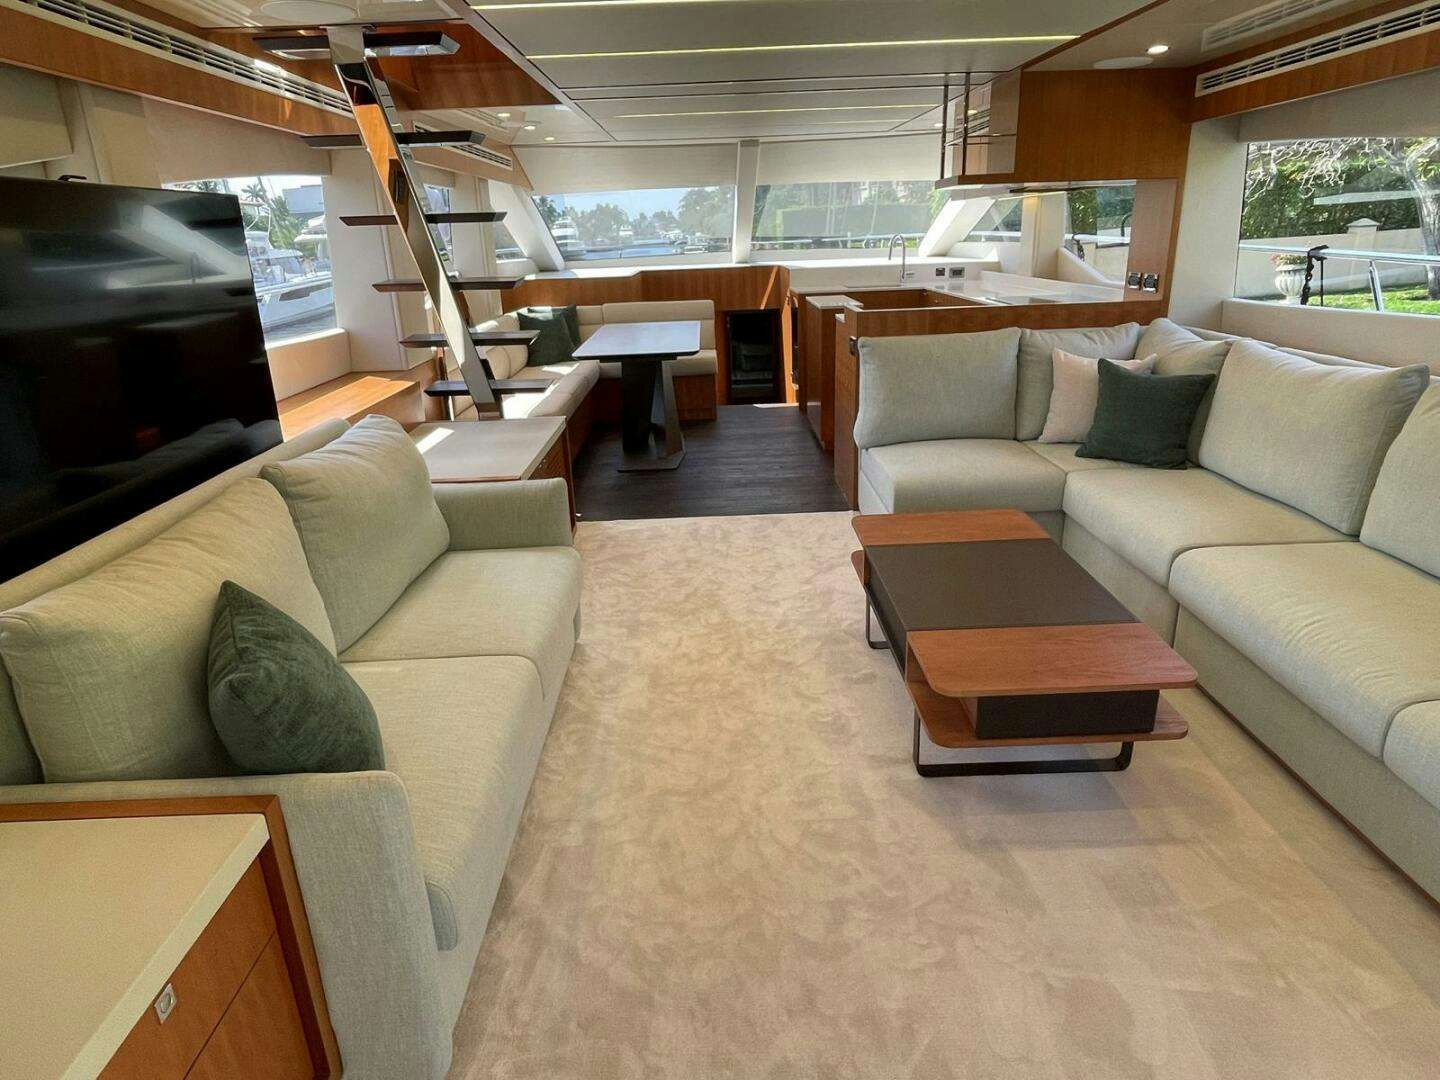 New 70 johnson
Yacht for Sale